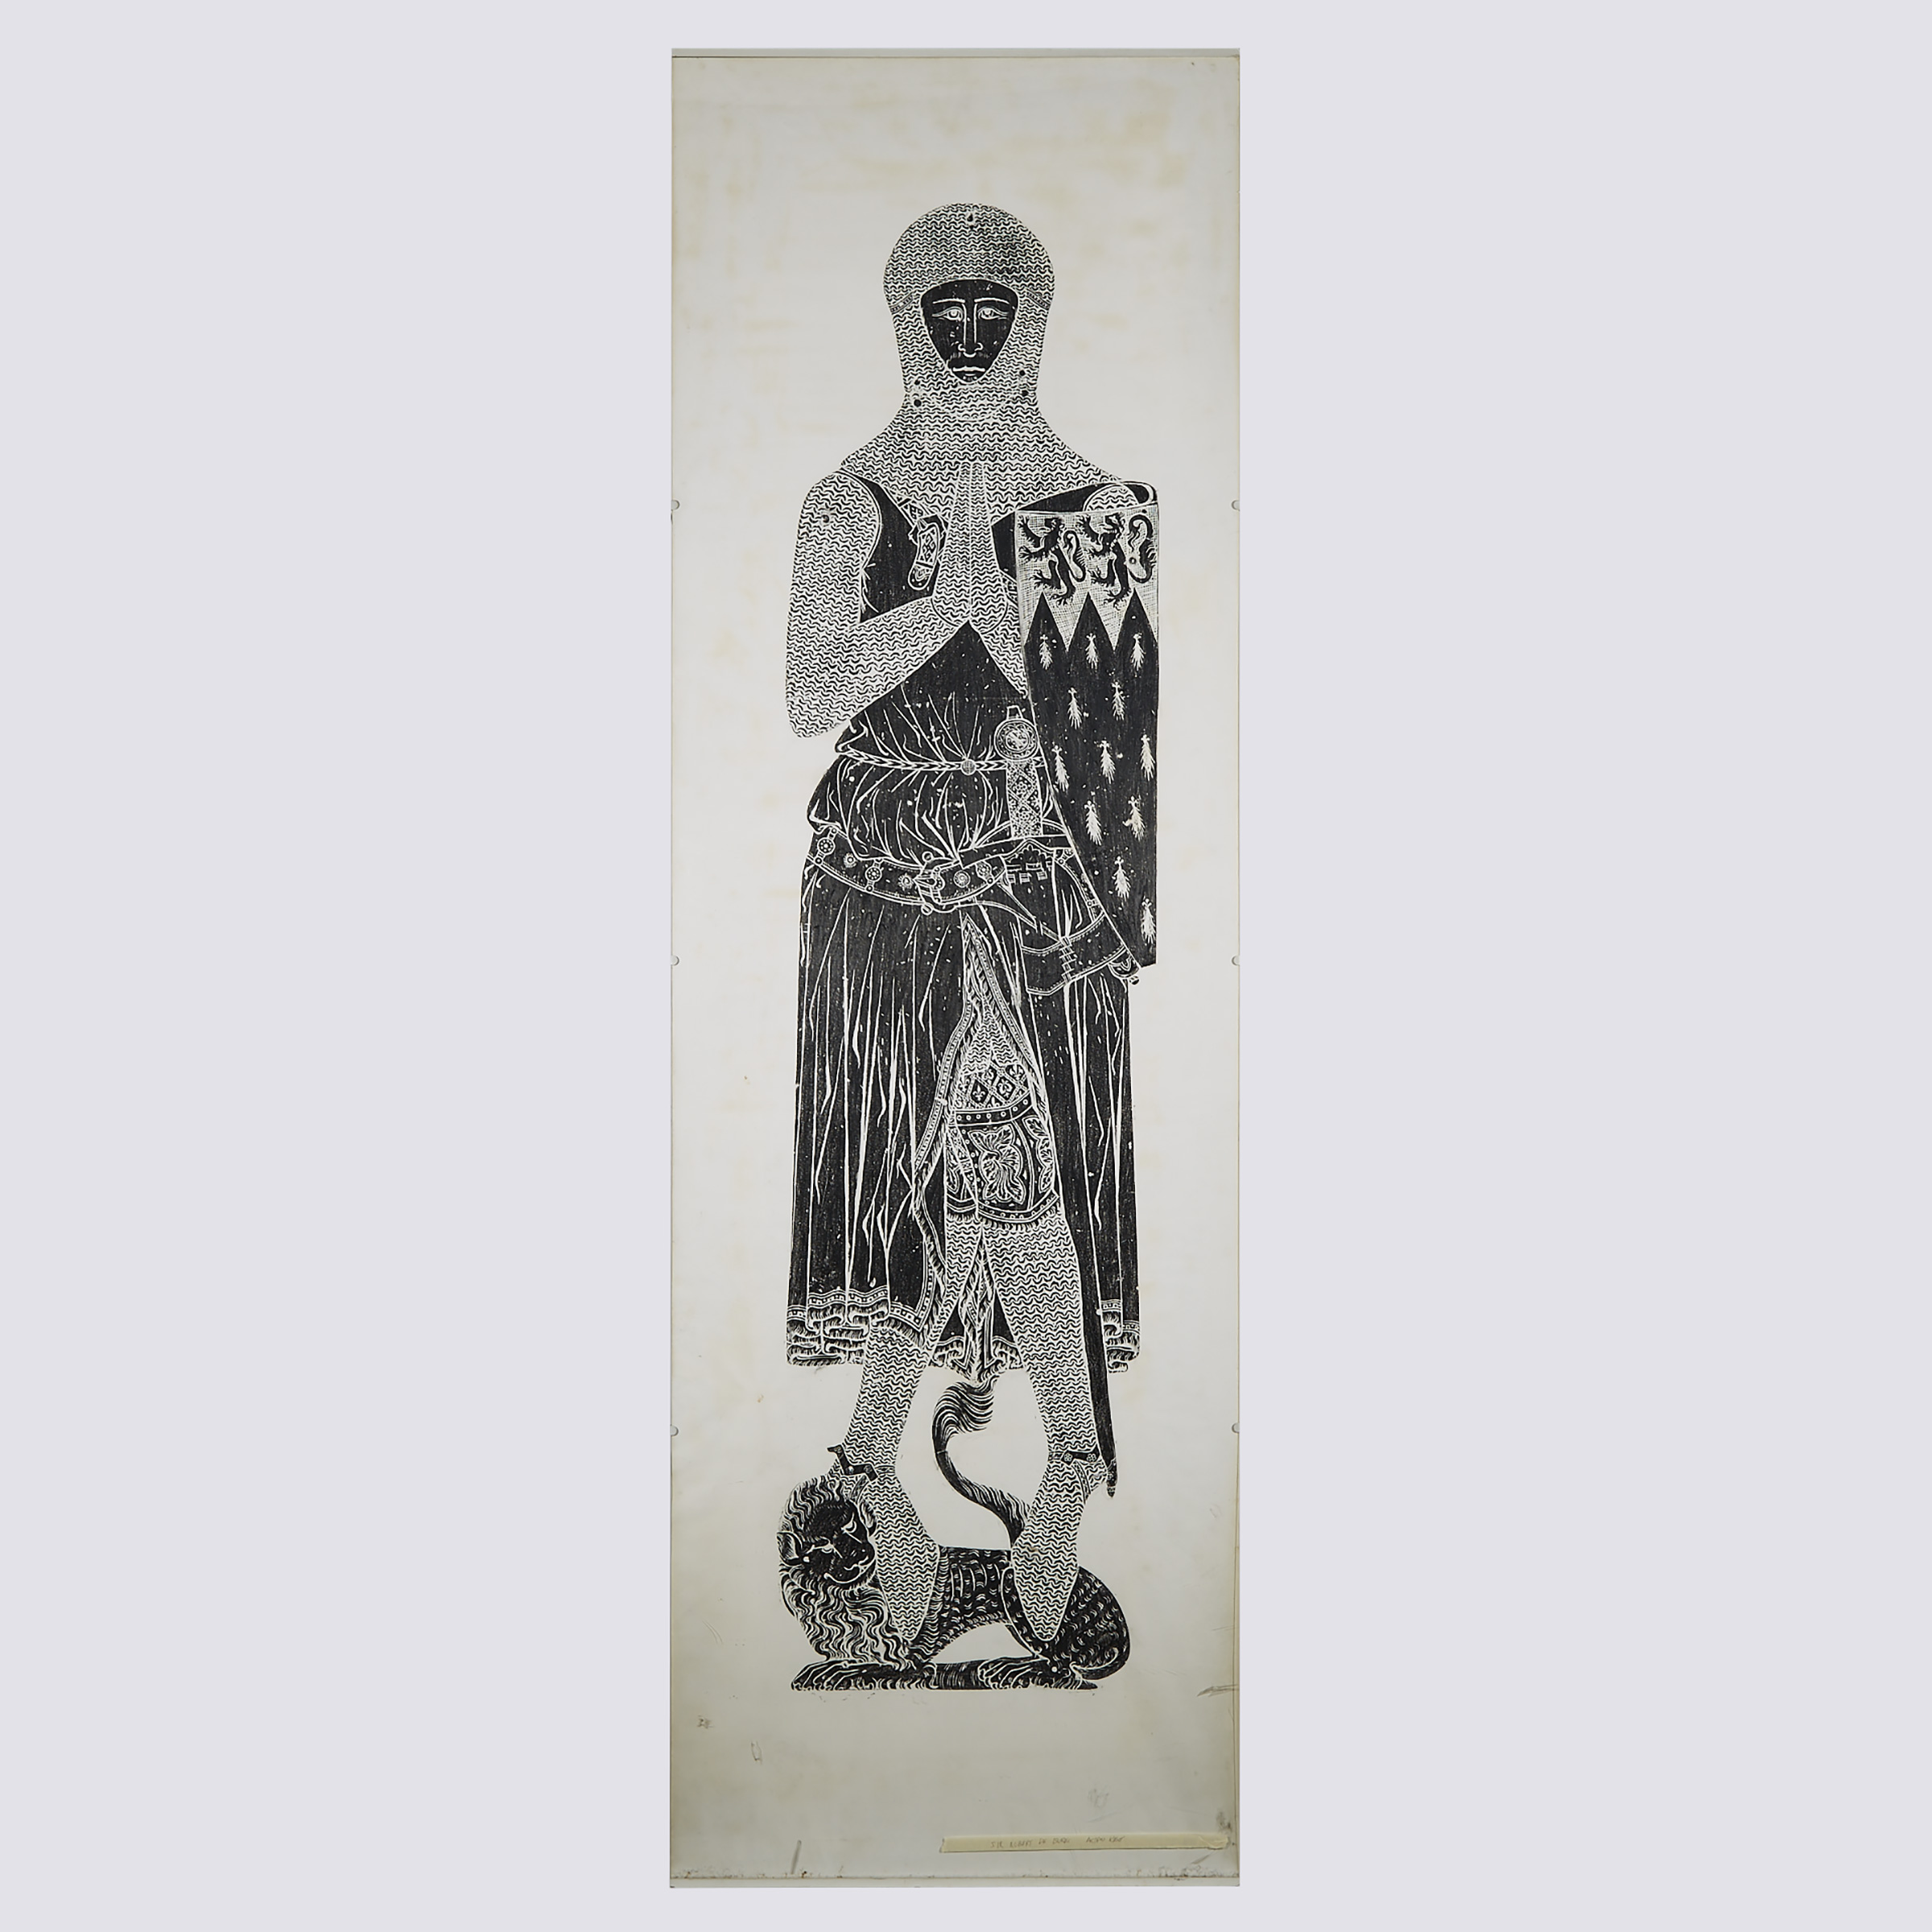 Rubbing of the Medieval Brass Effigy of Sir Robert de Bures at All Saints Church, Acton, Suffolk, England, mid 20th century